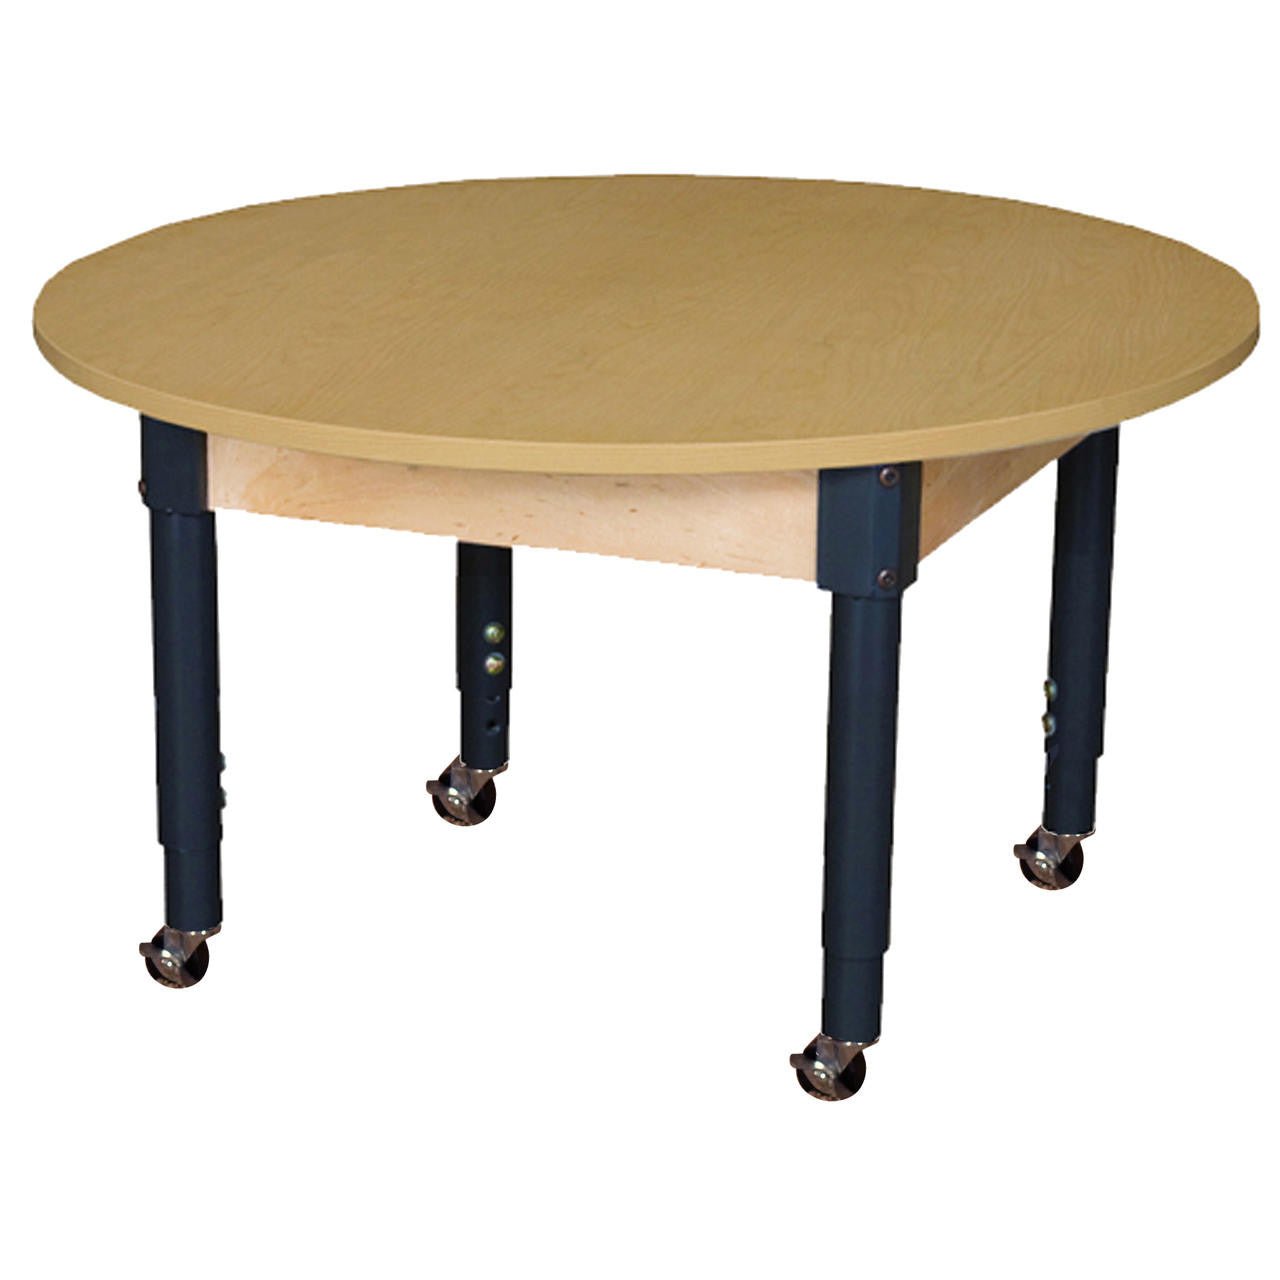 Round High Pressure Laminate Table with Adjustable Legs 14-19